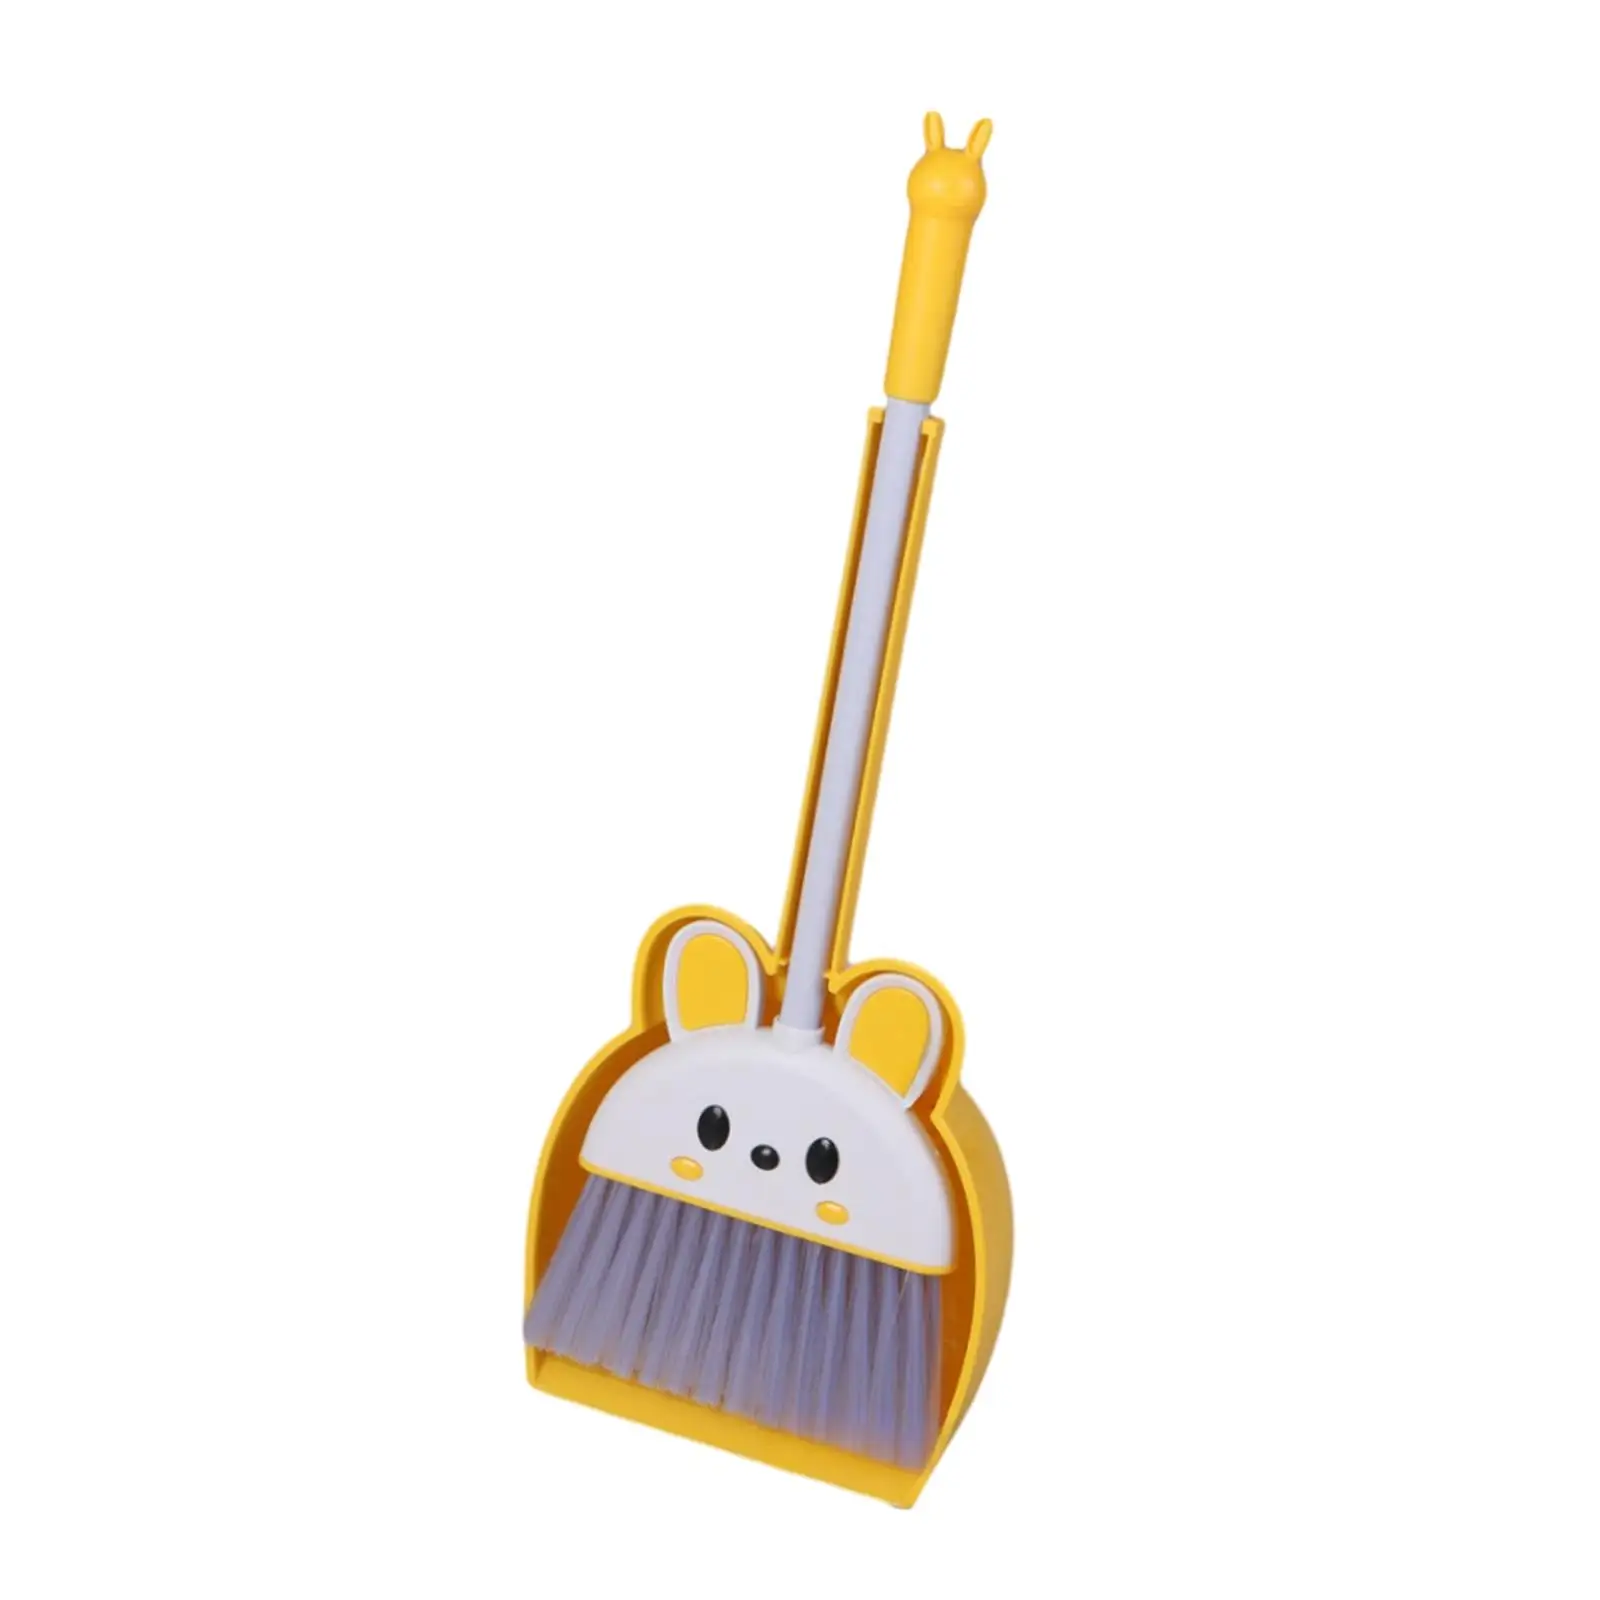 Housekeeping Pretend Play Cleaning Tools, Kids Cleaning Set ,Mini Broom and Dustpan Set for Kids for Preschool ,